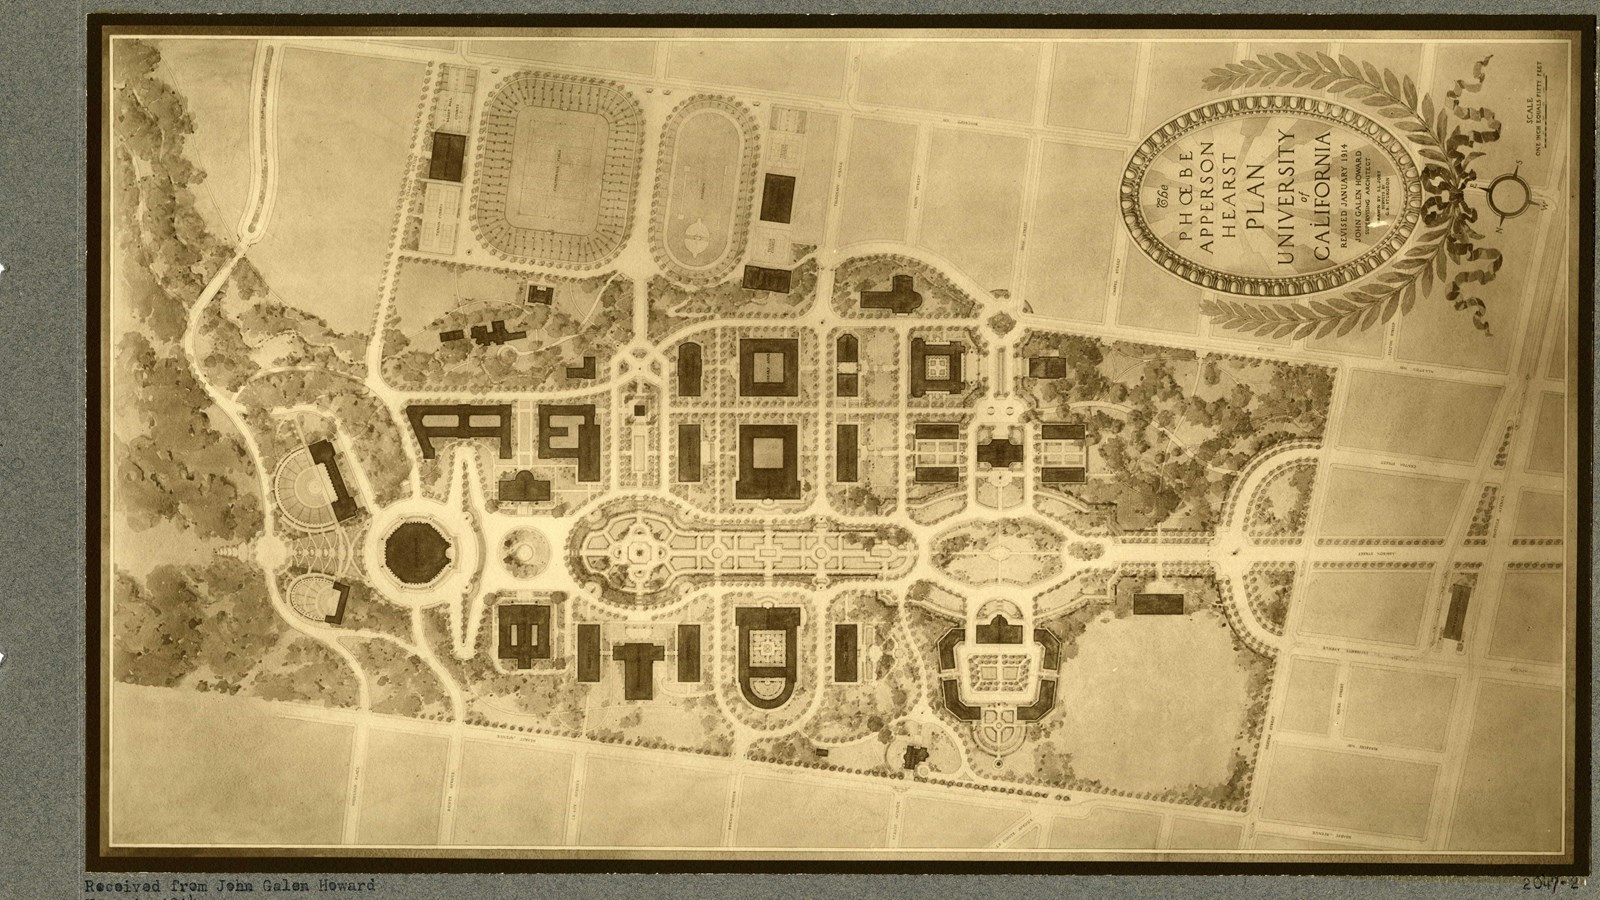 Plan of college campus of lots of buildings separated by trees and straight paths